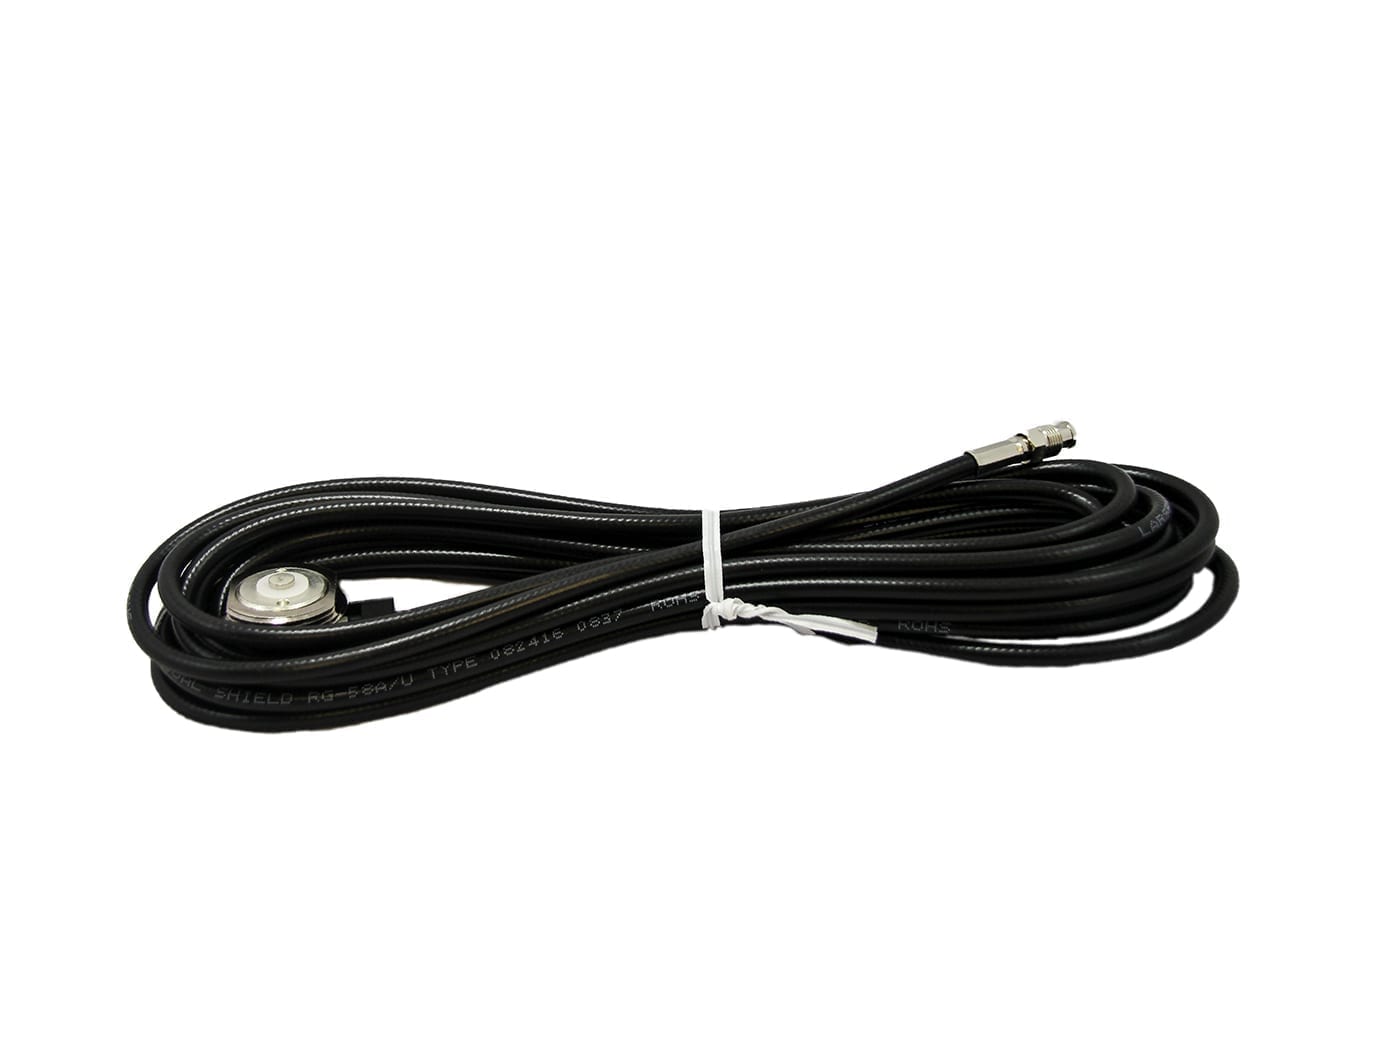 NMOKHFUD25: 3/4 Inch NMO Mount with Extra Long 25 foot Cable & No